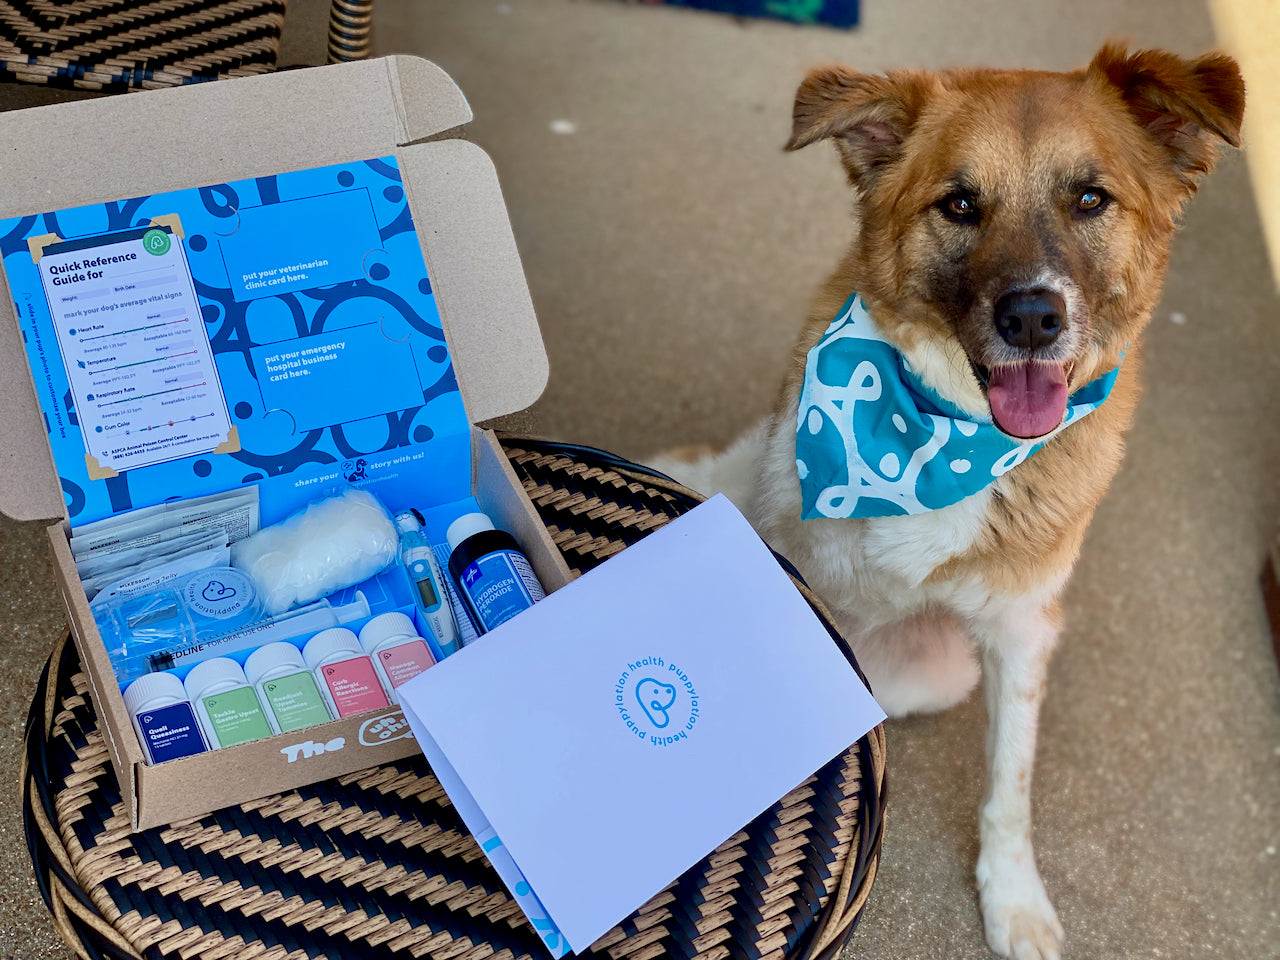 Winnie, an Akita mix, was the first Uh-Oh Kit customer. The Uh-Oh Kit is a emergency preparedness kit for dogs. It includes meclizine, famotidine, probiotic, diphenhydramine, loratadine, a digital thermometer, oral syringe, pill splitter and instructions.